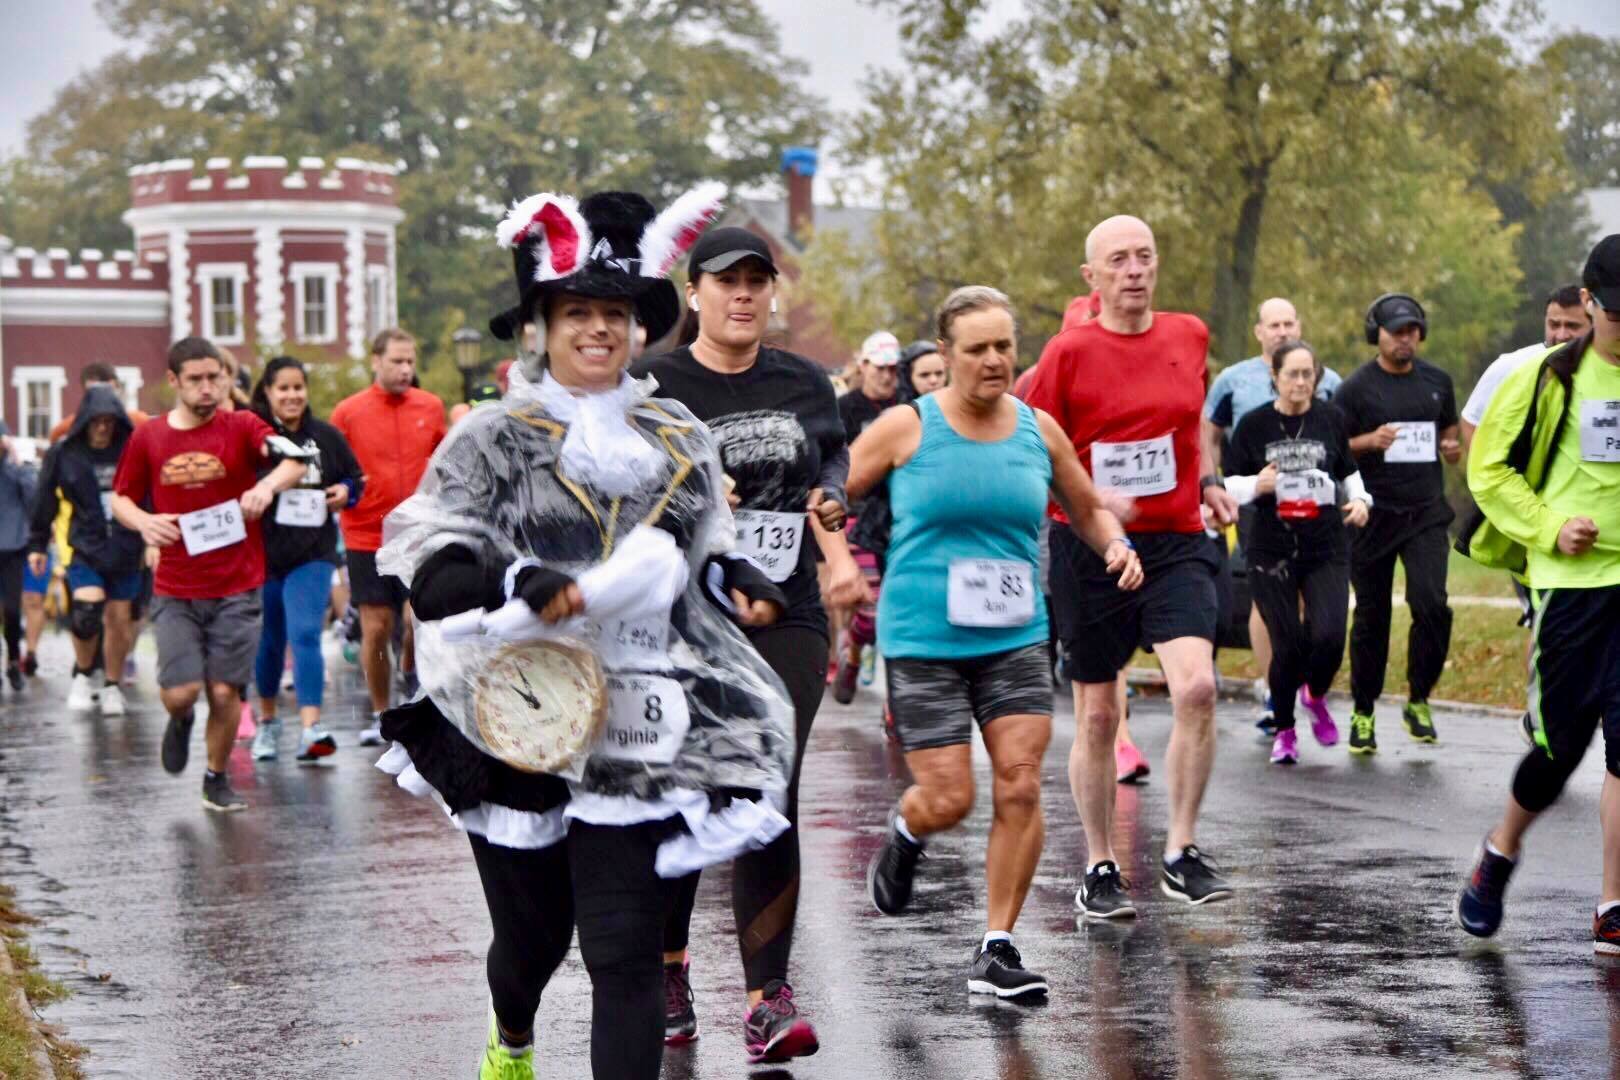 Bayside Historical Society's 20th Annual Totten Trot 5K Foot Race and Kids' Fun Run, Queens, New York, United States